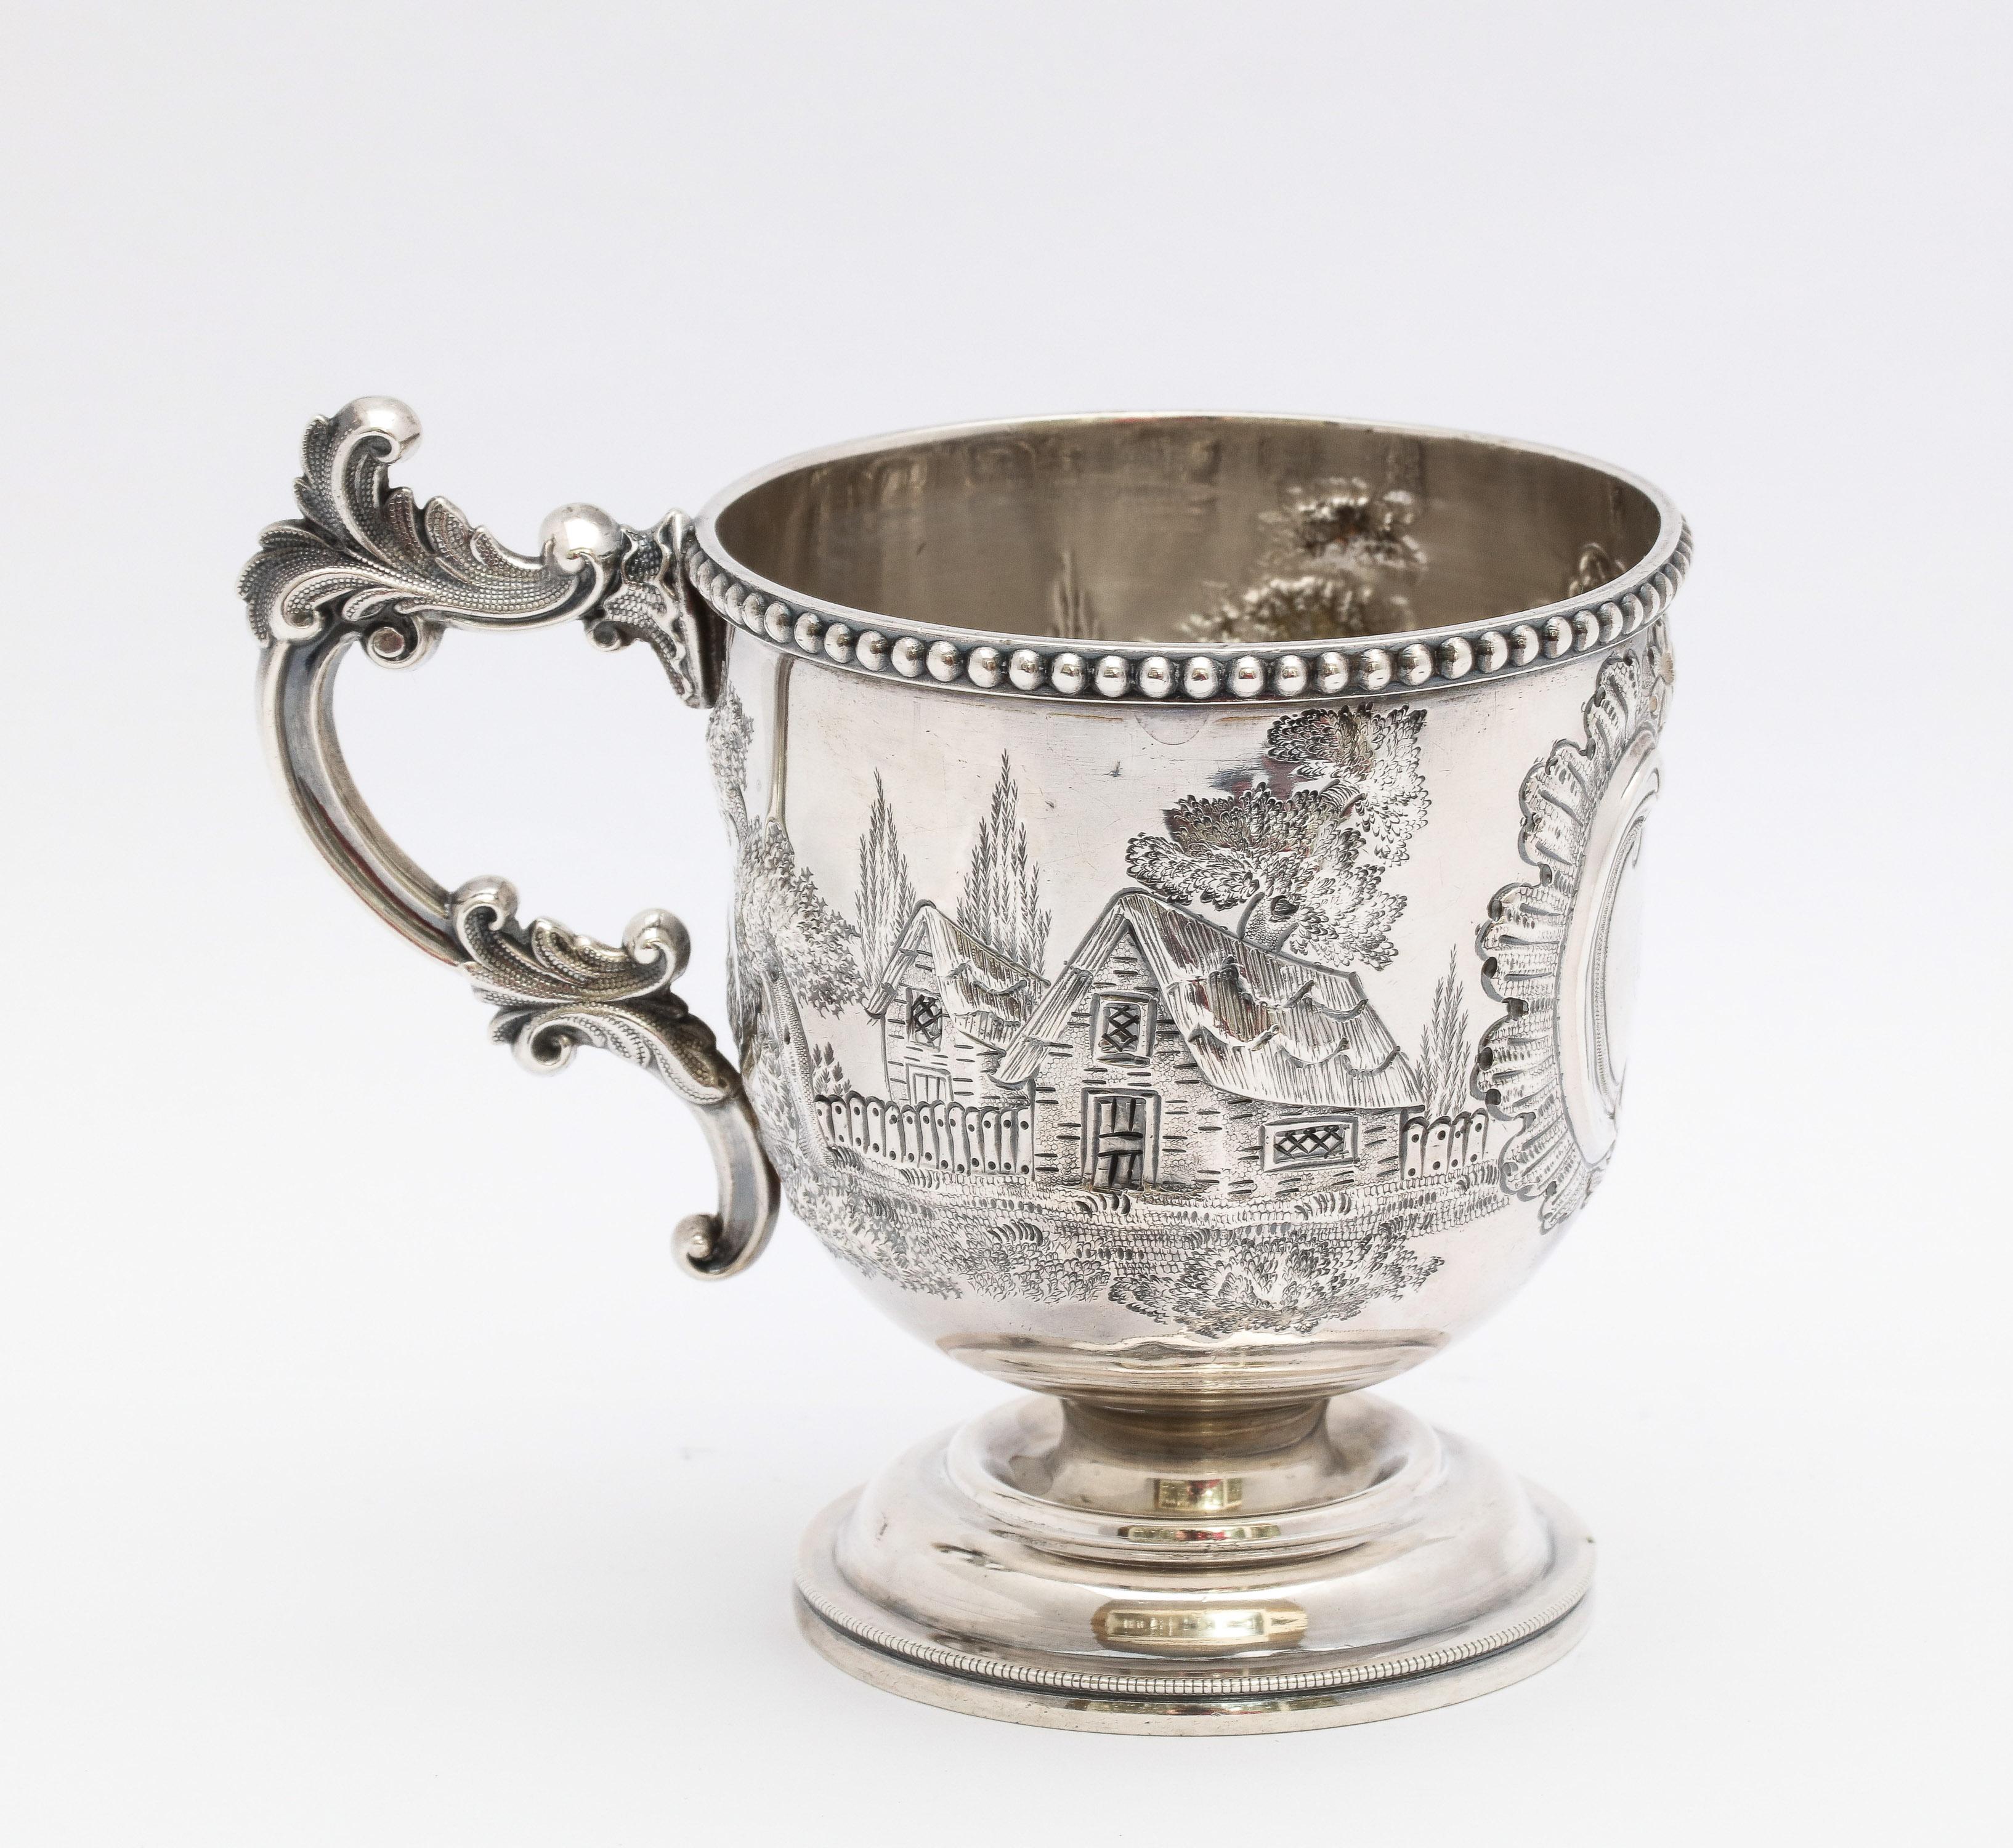 American Coin Silver (.900) cup/mug on pedestal base, Bailey and Company, Philadelphia, circa 1846-1878. Decorated with country cabins in the woods. Bead work decorates the upper rim of the mug. Inscription in the cartouche reads - Little Mary.